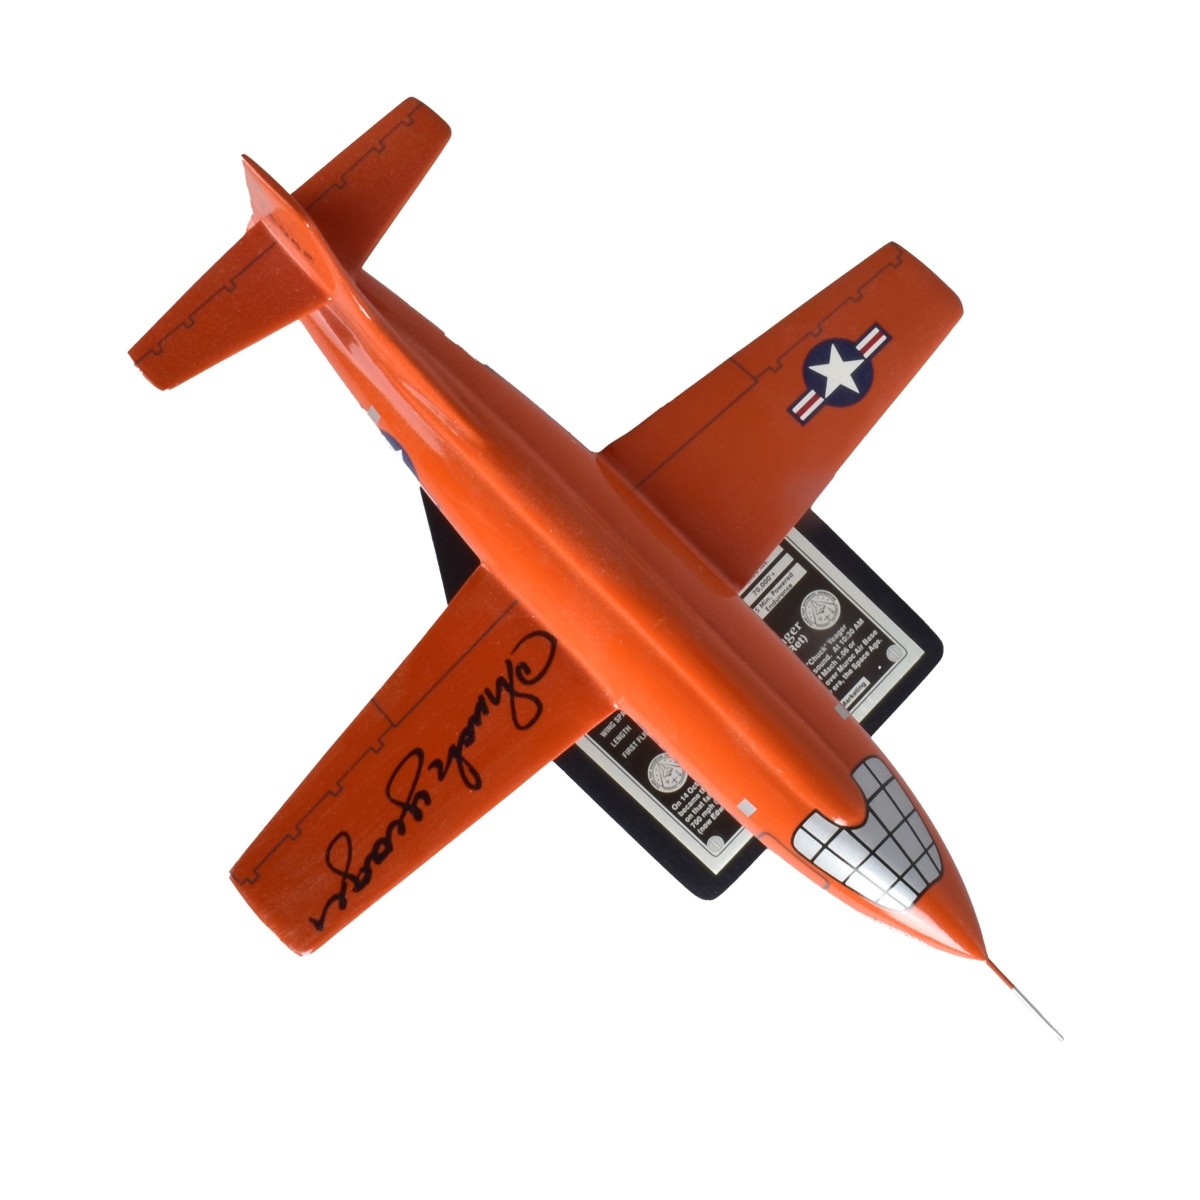 Chuck Yeager Signed Bell X-1 Rocket Plane Model